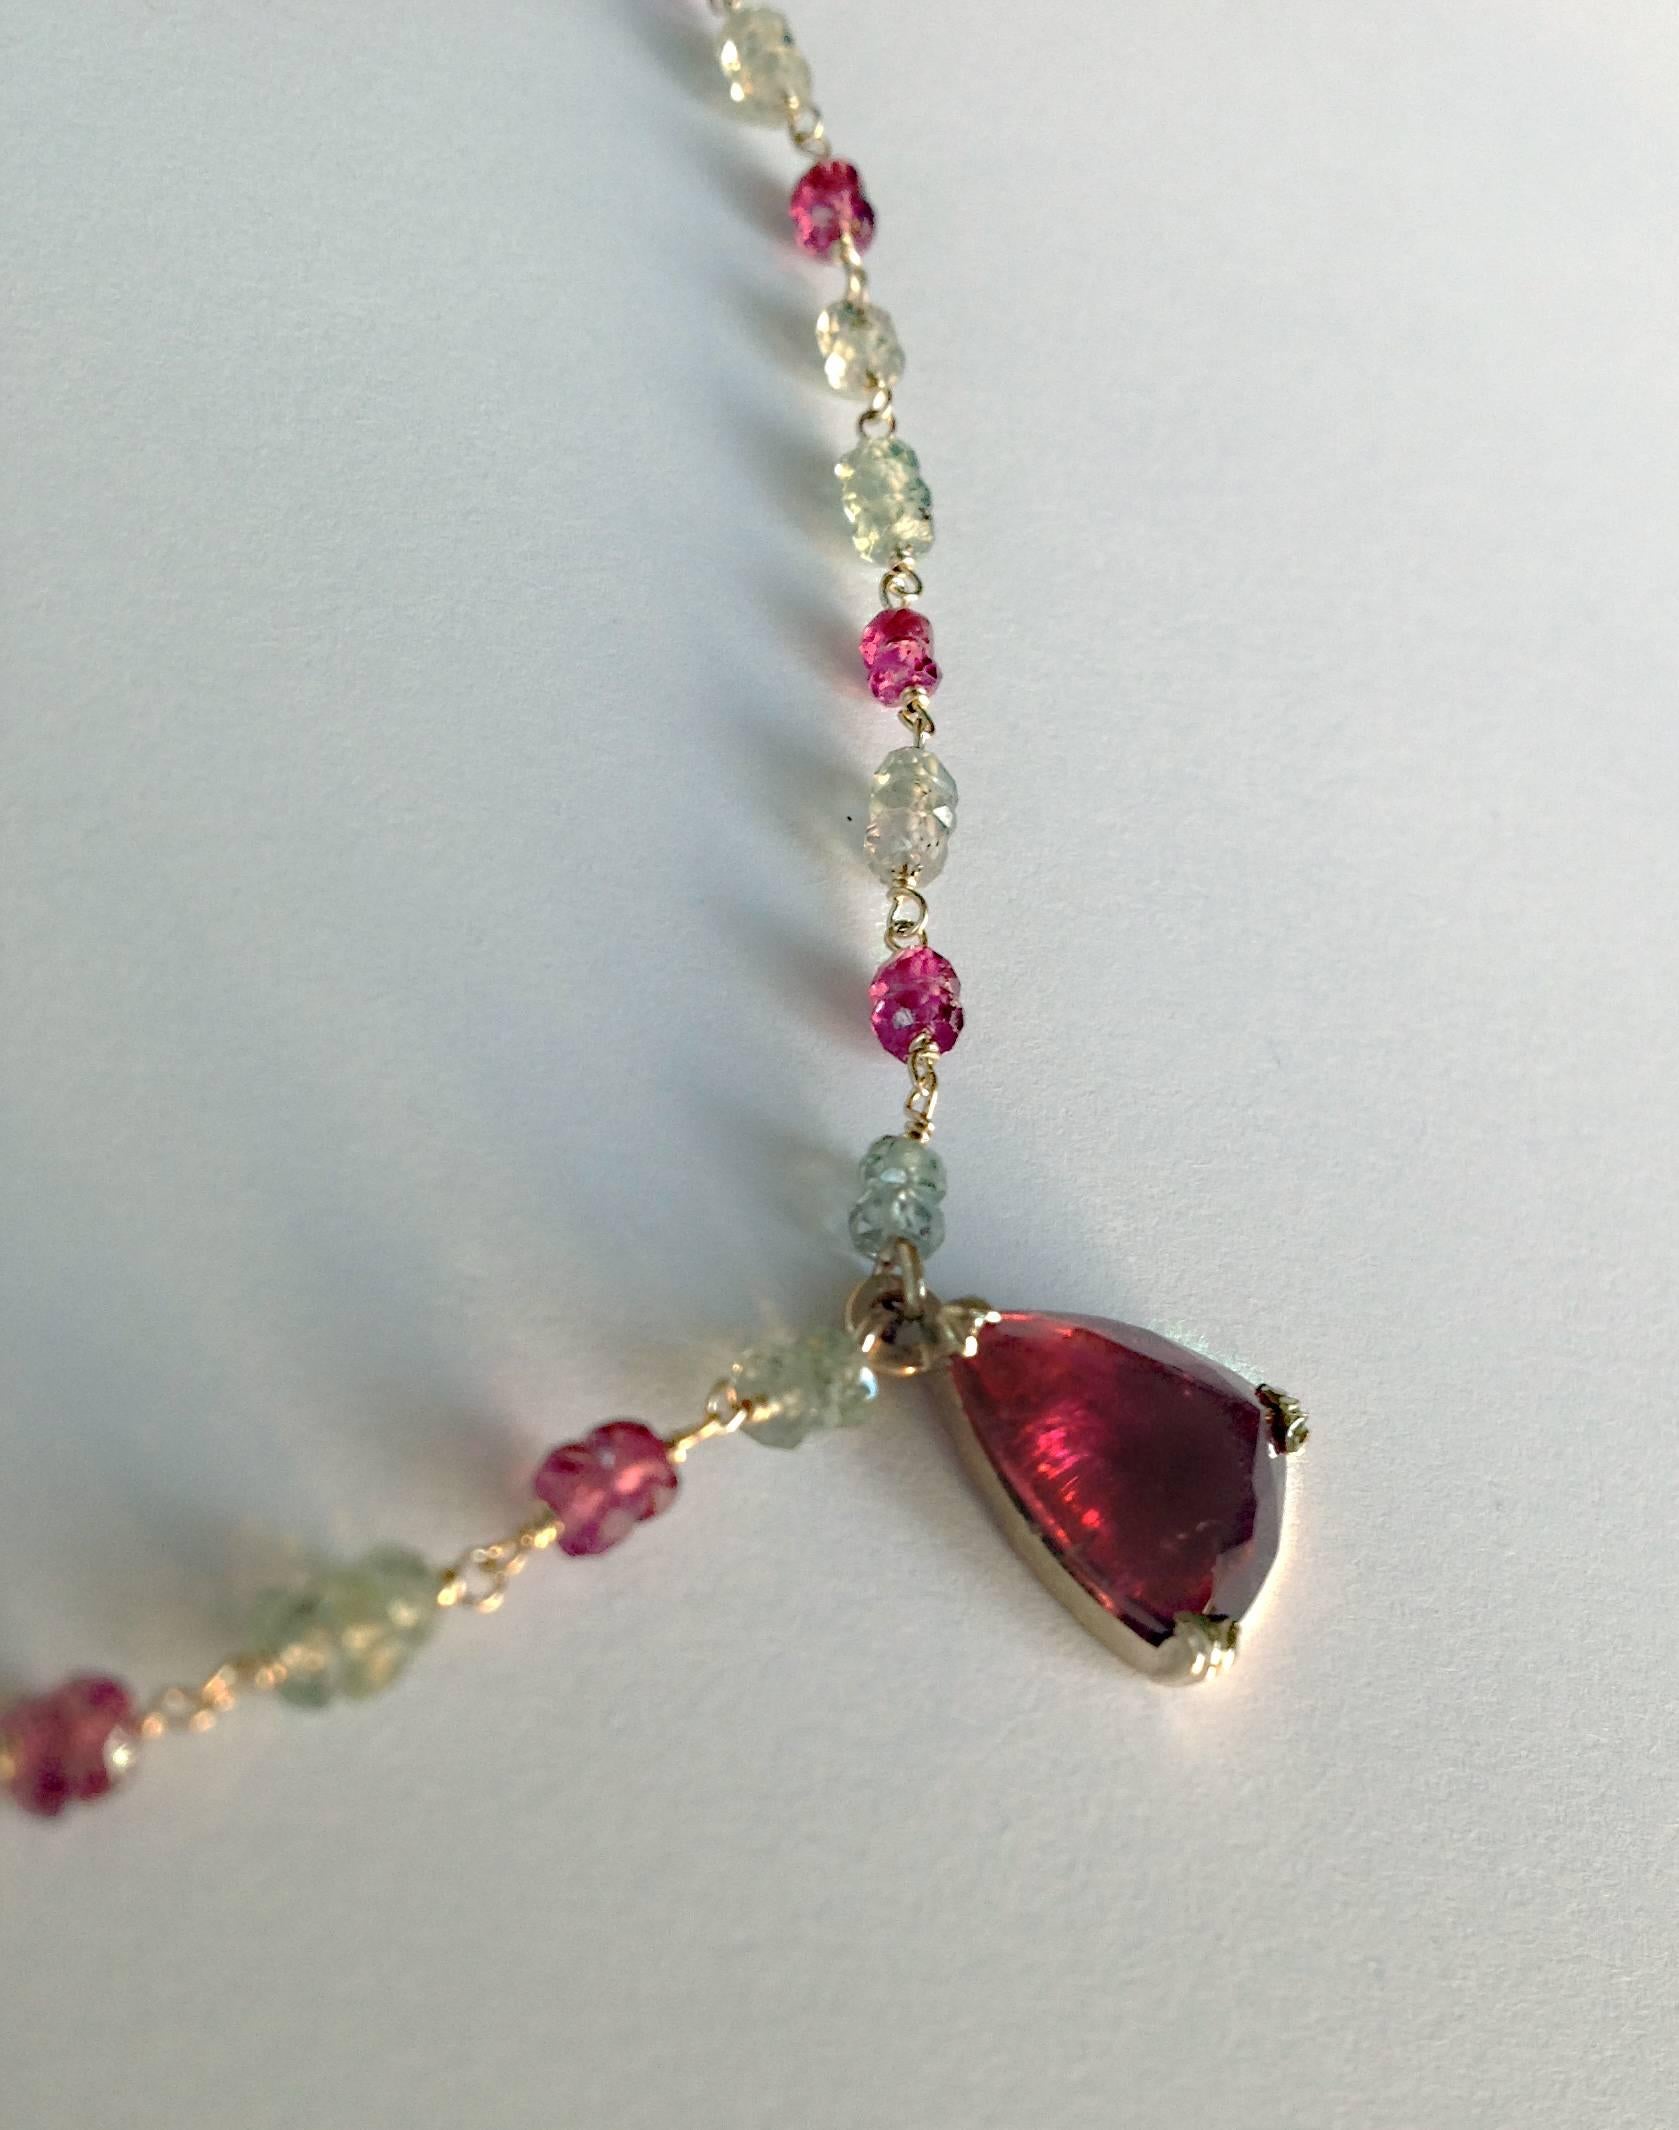 Dalben design hand crafted necklace composed of a pear cut red tourmaline ( Rubelite ) mounted on a white gold 18k rosary-style chain with faceted green and red sapphire beads  spaced at even intervals . 
Green and red sapphire beads dimension: 2,9